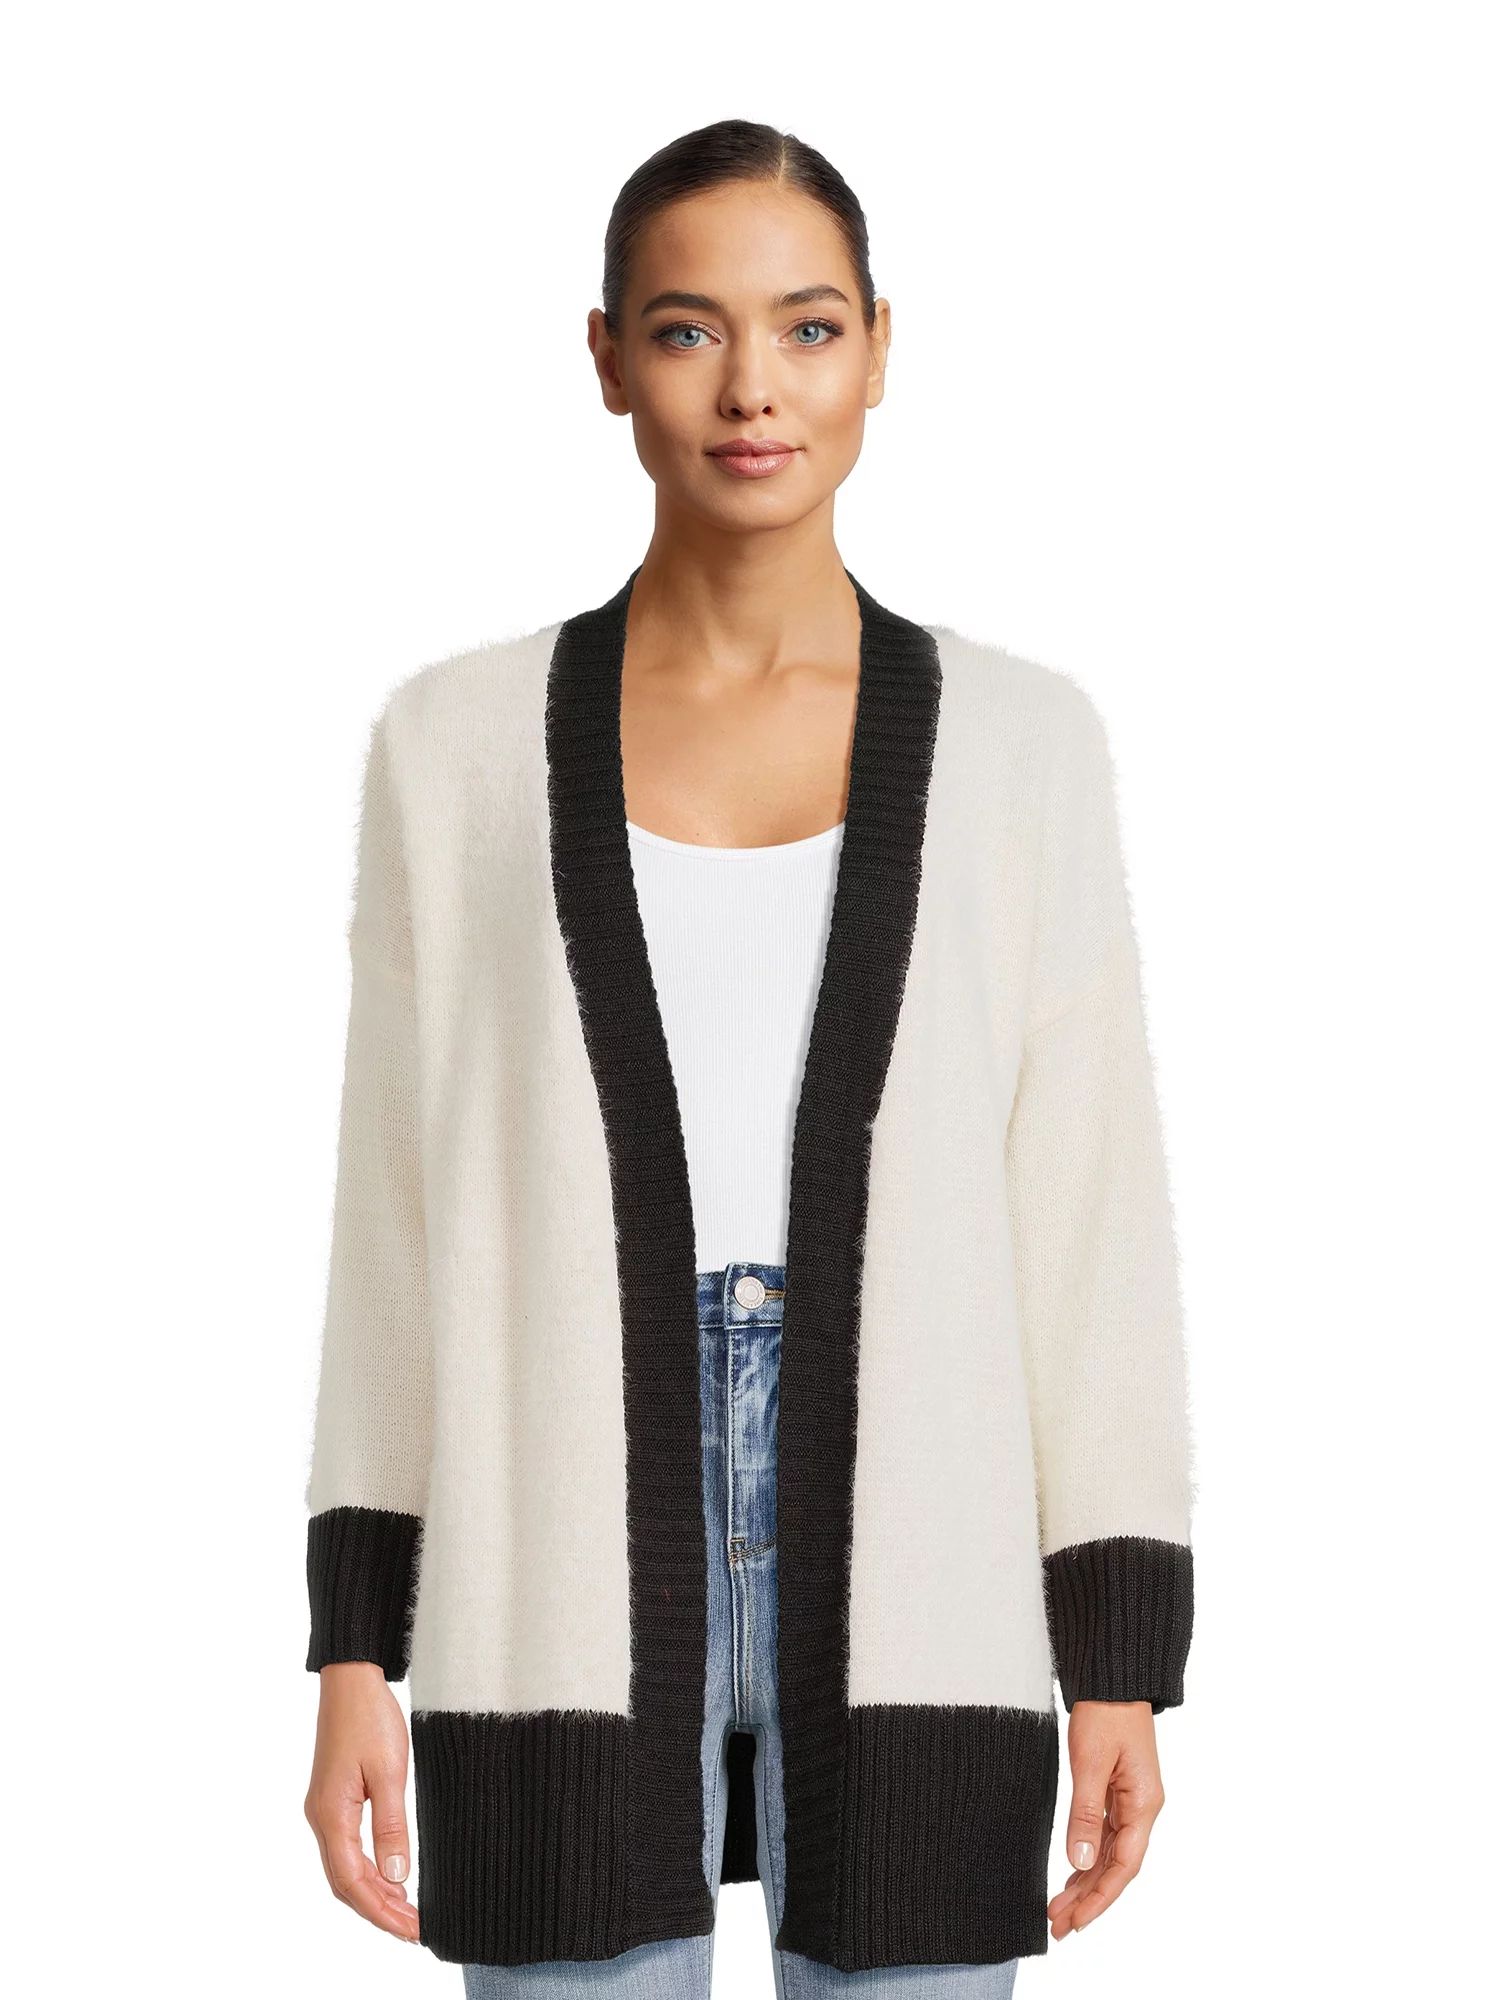 Dreamers by Debut Women's Open Front Cardigan Sweater, Midweight, Sizes XS-XL | Walmart (US)